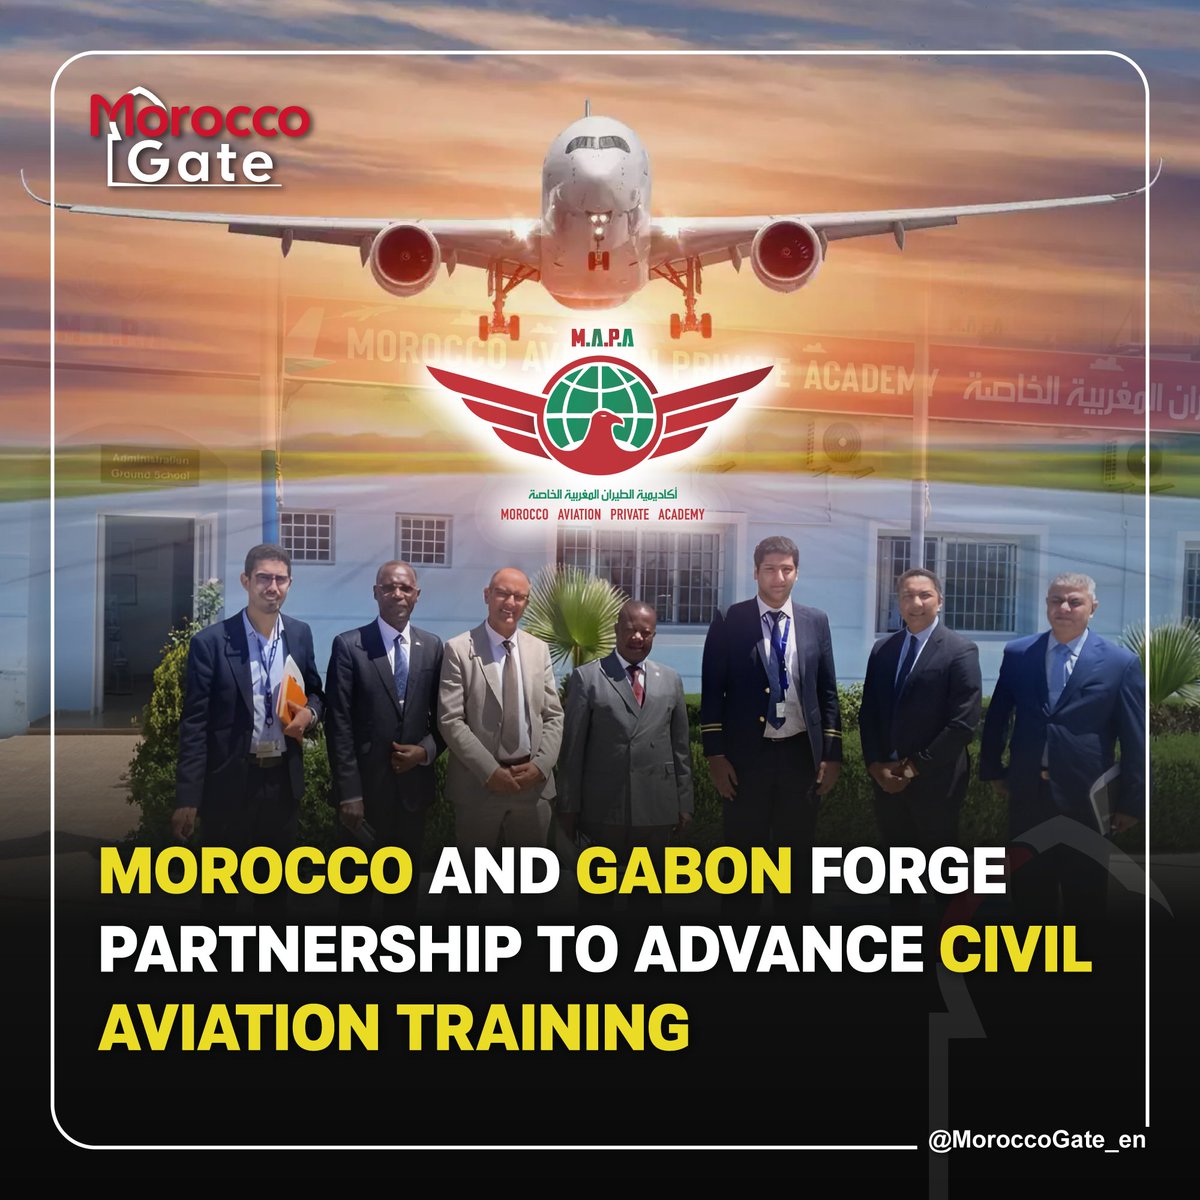 🇲🇦🇬🇦 #Morocco Aviation Private Academy (MAPA) has secured a contract to train civil aviation professionals in #Gabon, signing a cooperative agreement with the National Civil Aviation Agency of Gabon (ANAC). This 5-year renewable deal aims to bolster collaboration in aviation